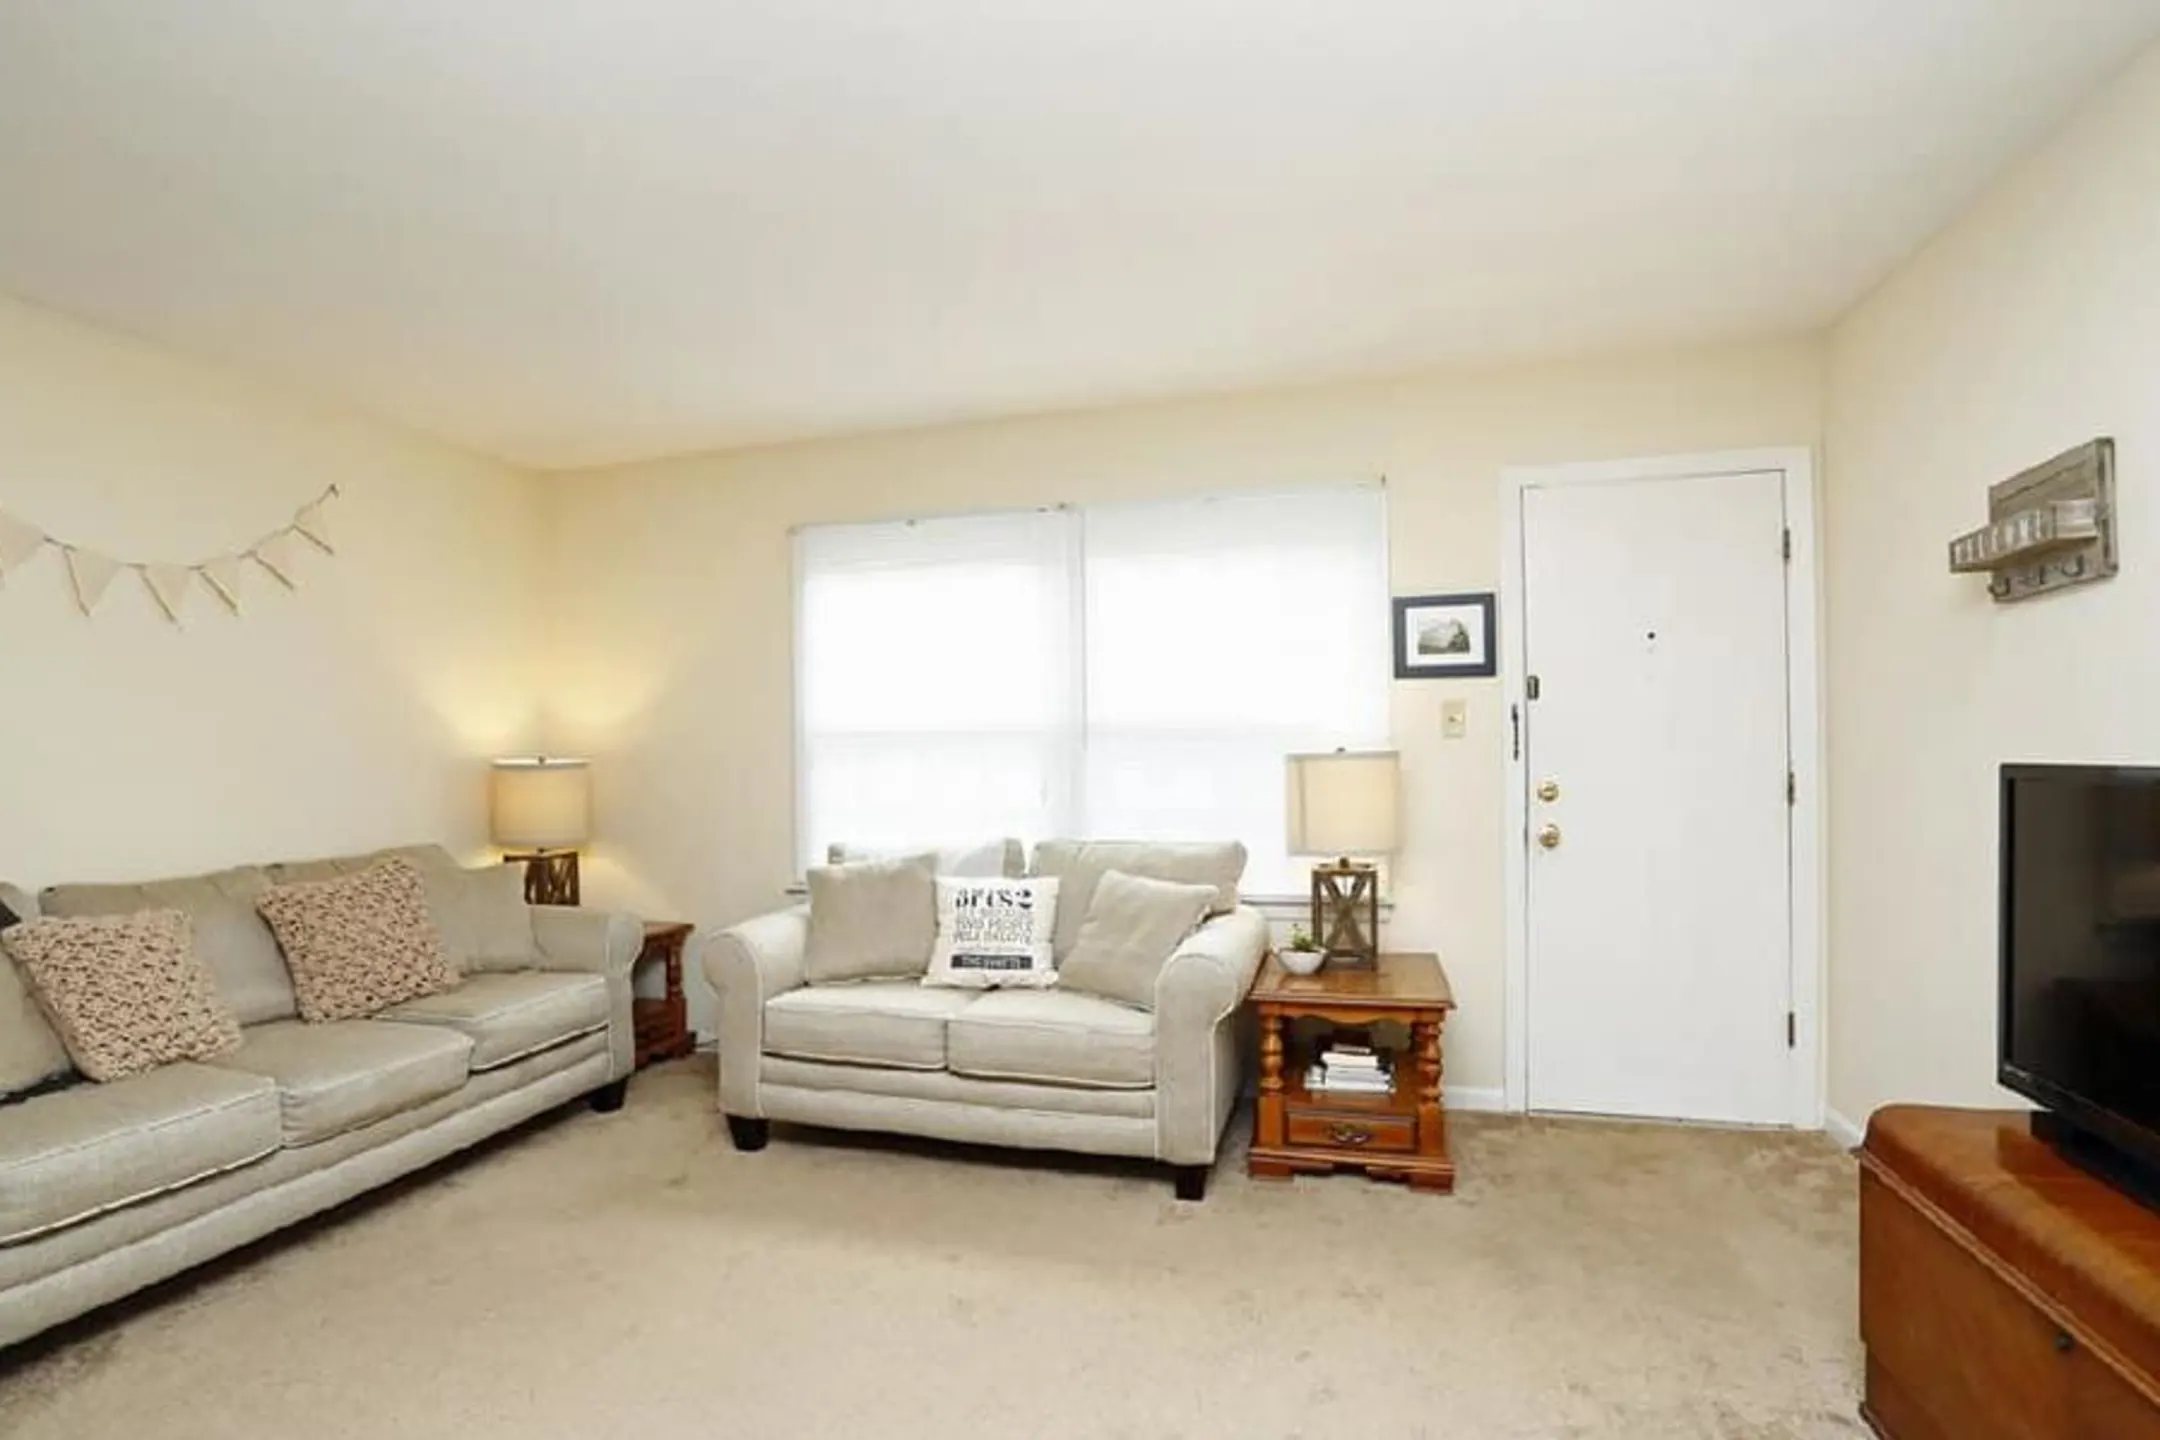 Living Room - Morganton Arms Apartments - Fayetteville, NC